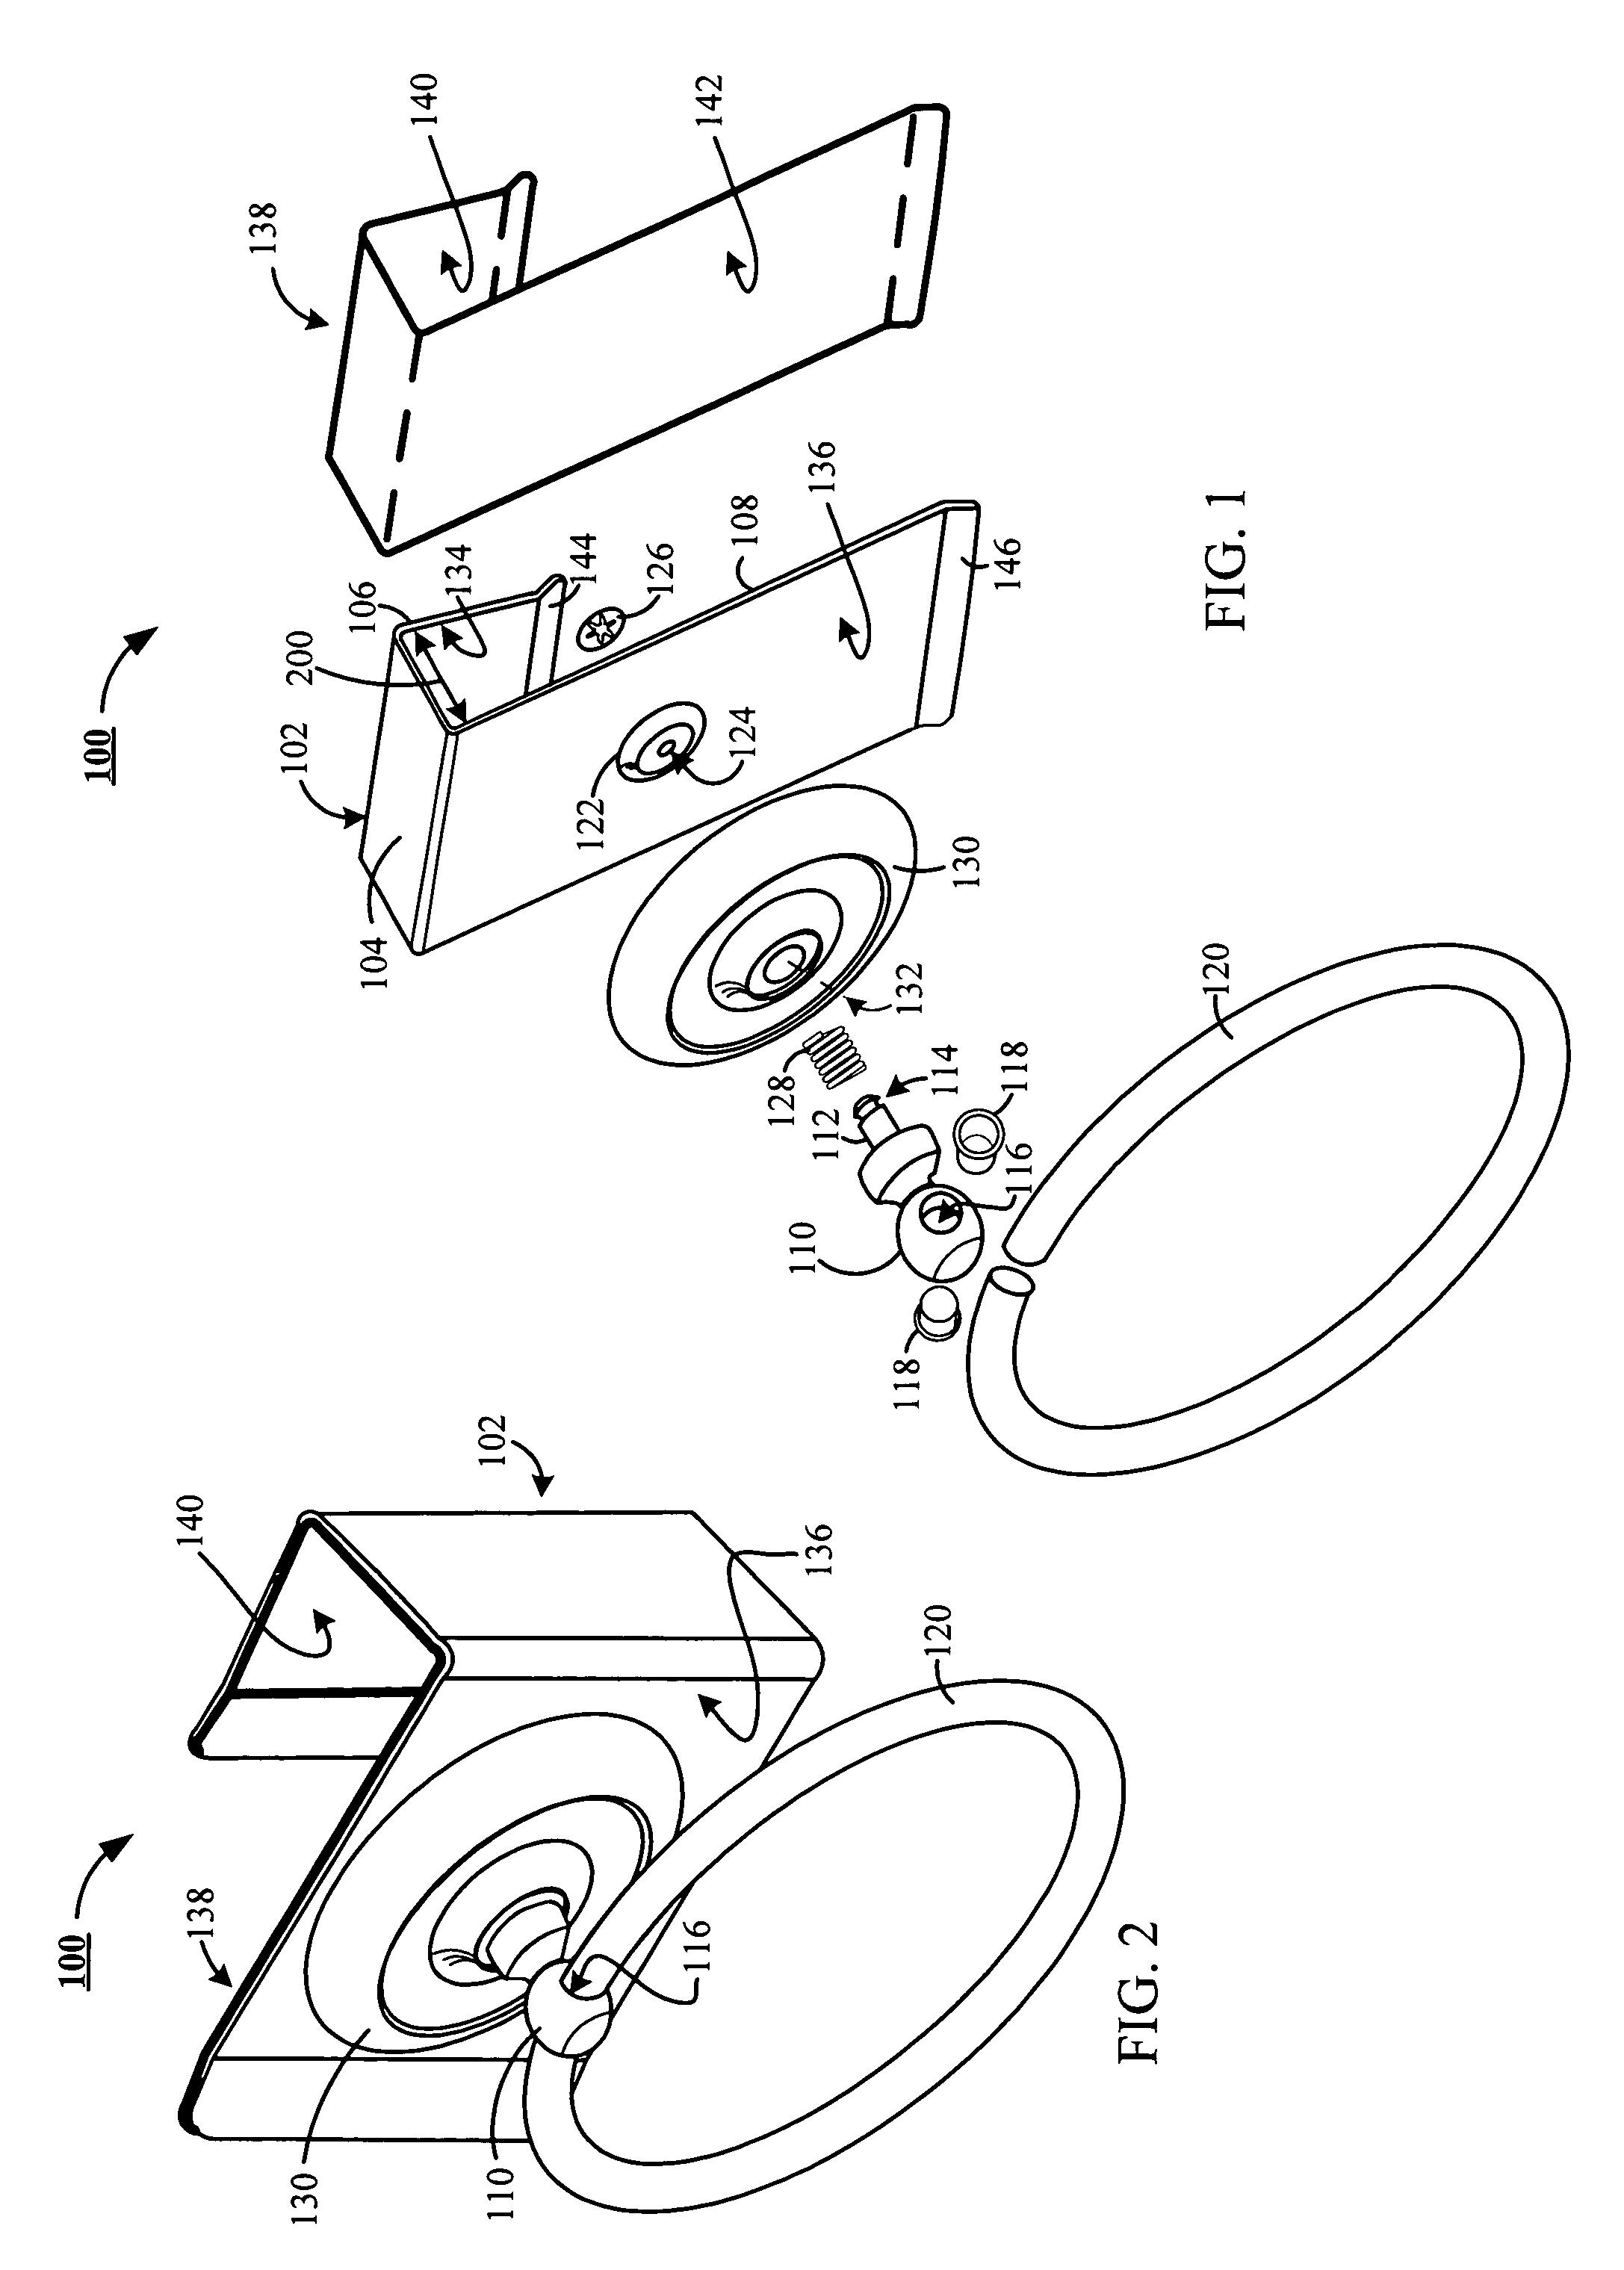 Portable article support apparatus